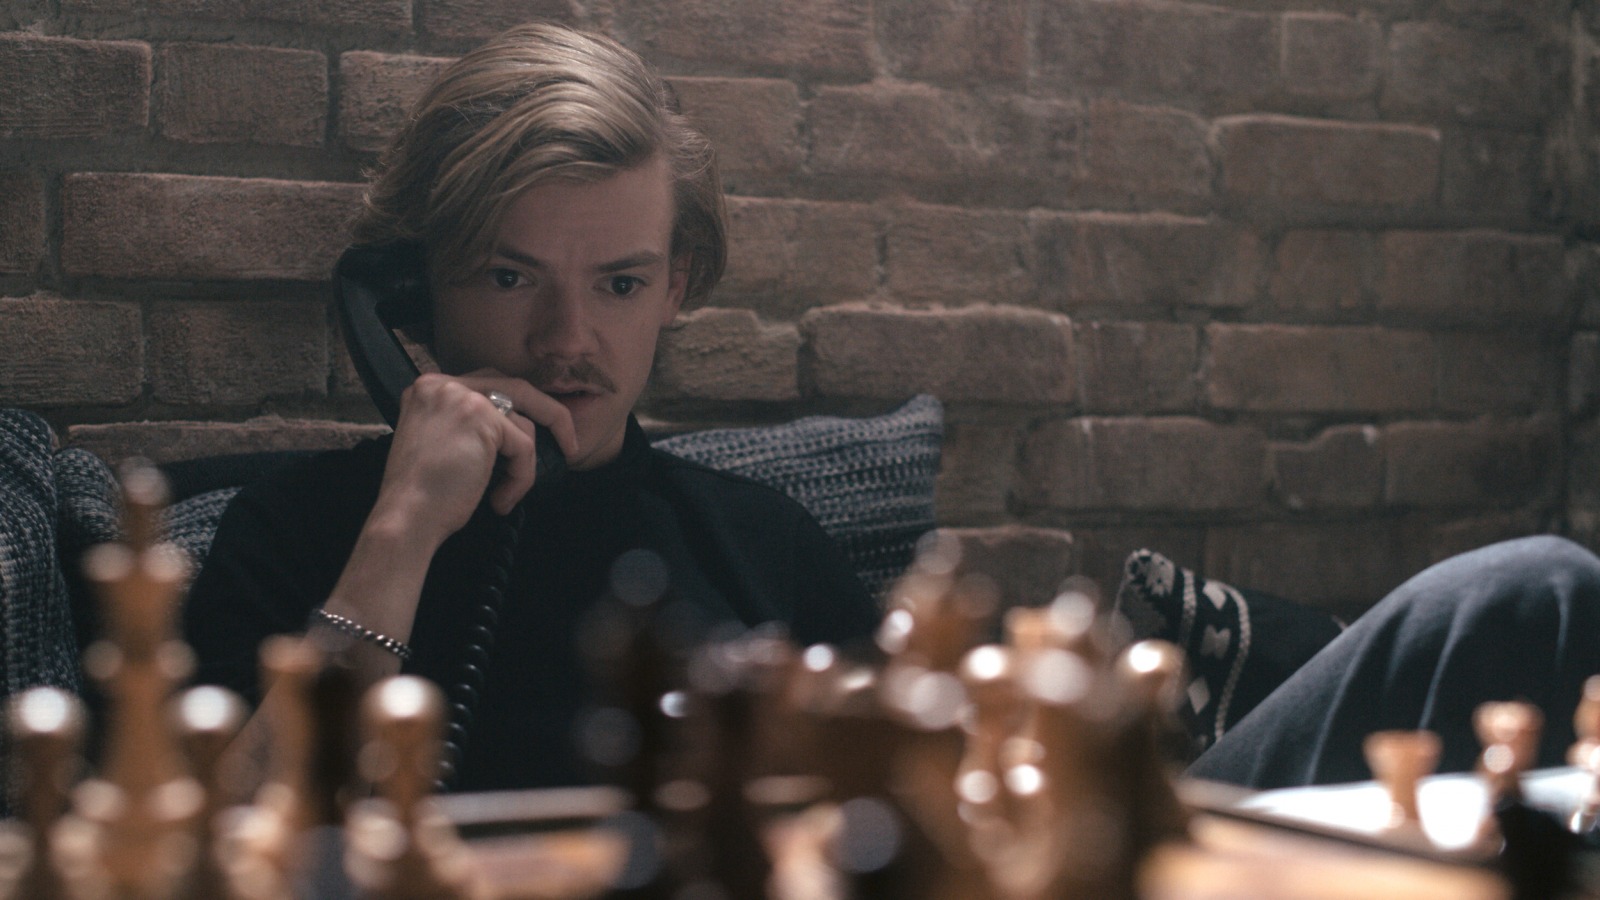 The Queen's Gambit (TV Mini Series 2020) - Thomas Brodie-Sangster